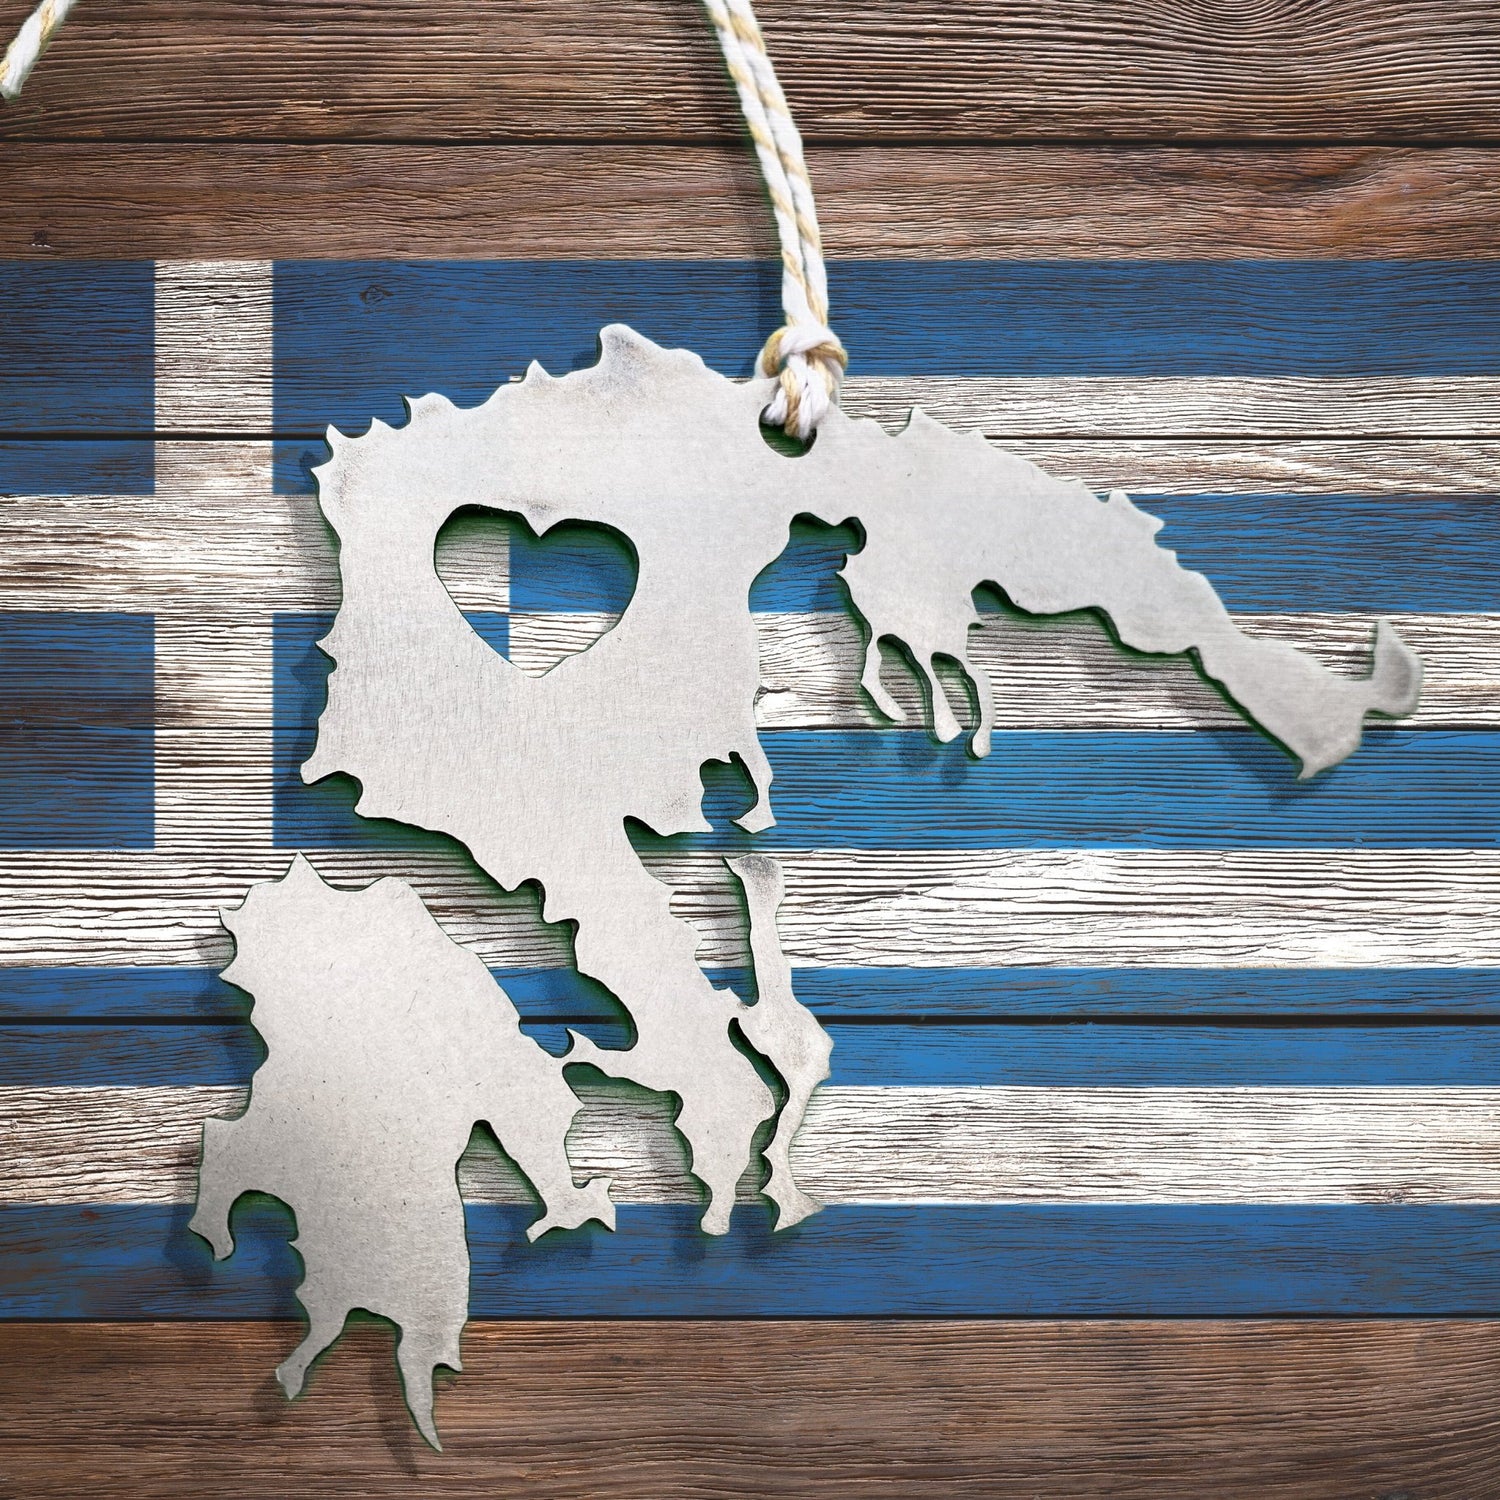 PLACES COLLECTION - Authenticaa
Ornaments to celebrate your country of heart, welcome a guest or newcomer